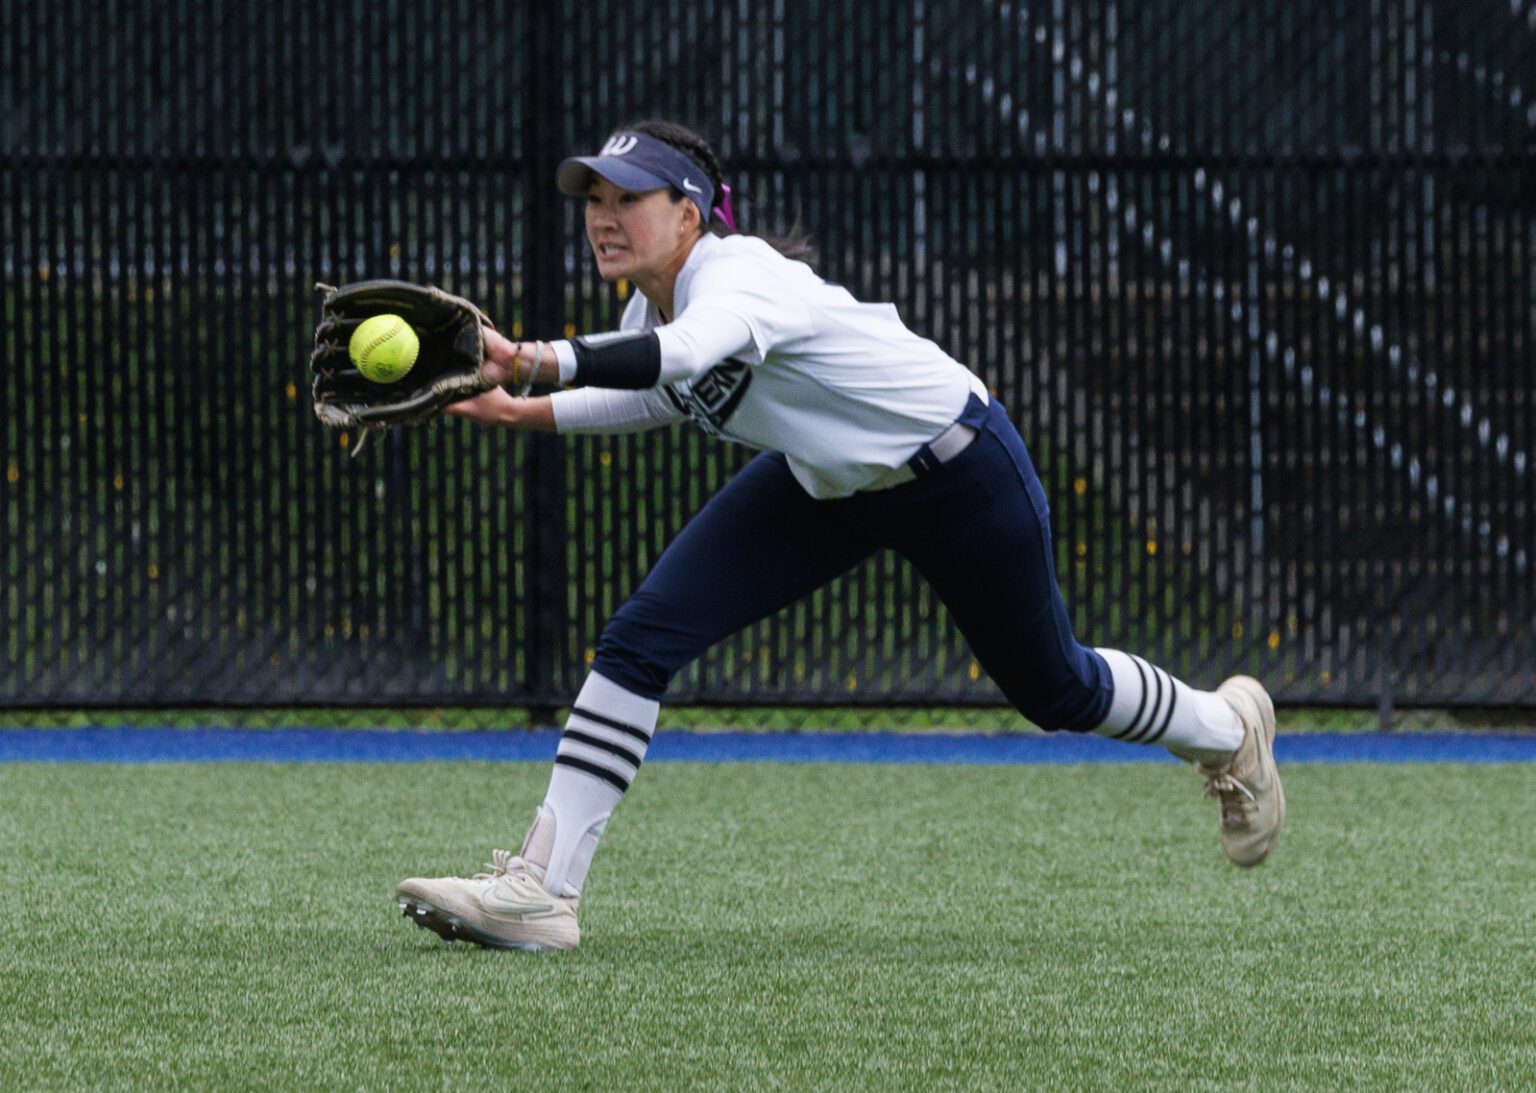 Western Washington University’s Lauren Lo makes a running catch in the outfield as the Vikings took on Saint Martin’s during a game on April 29.